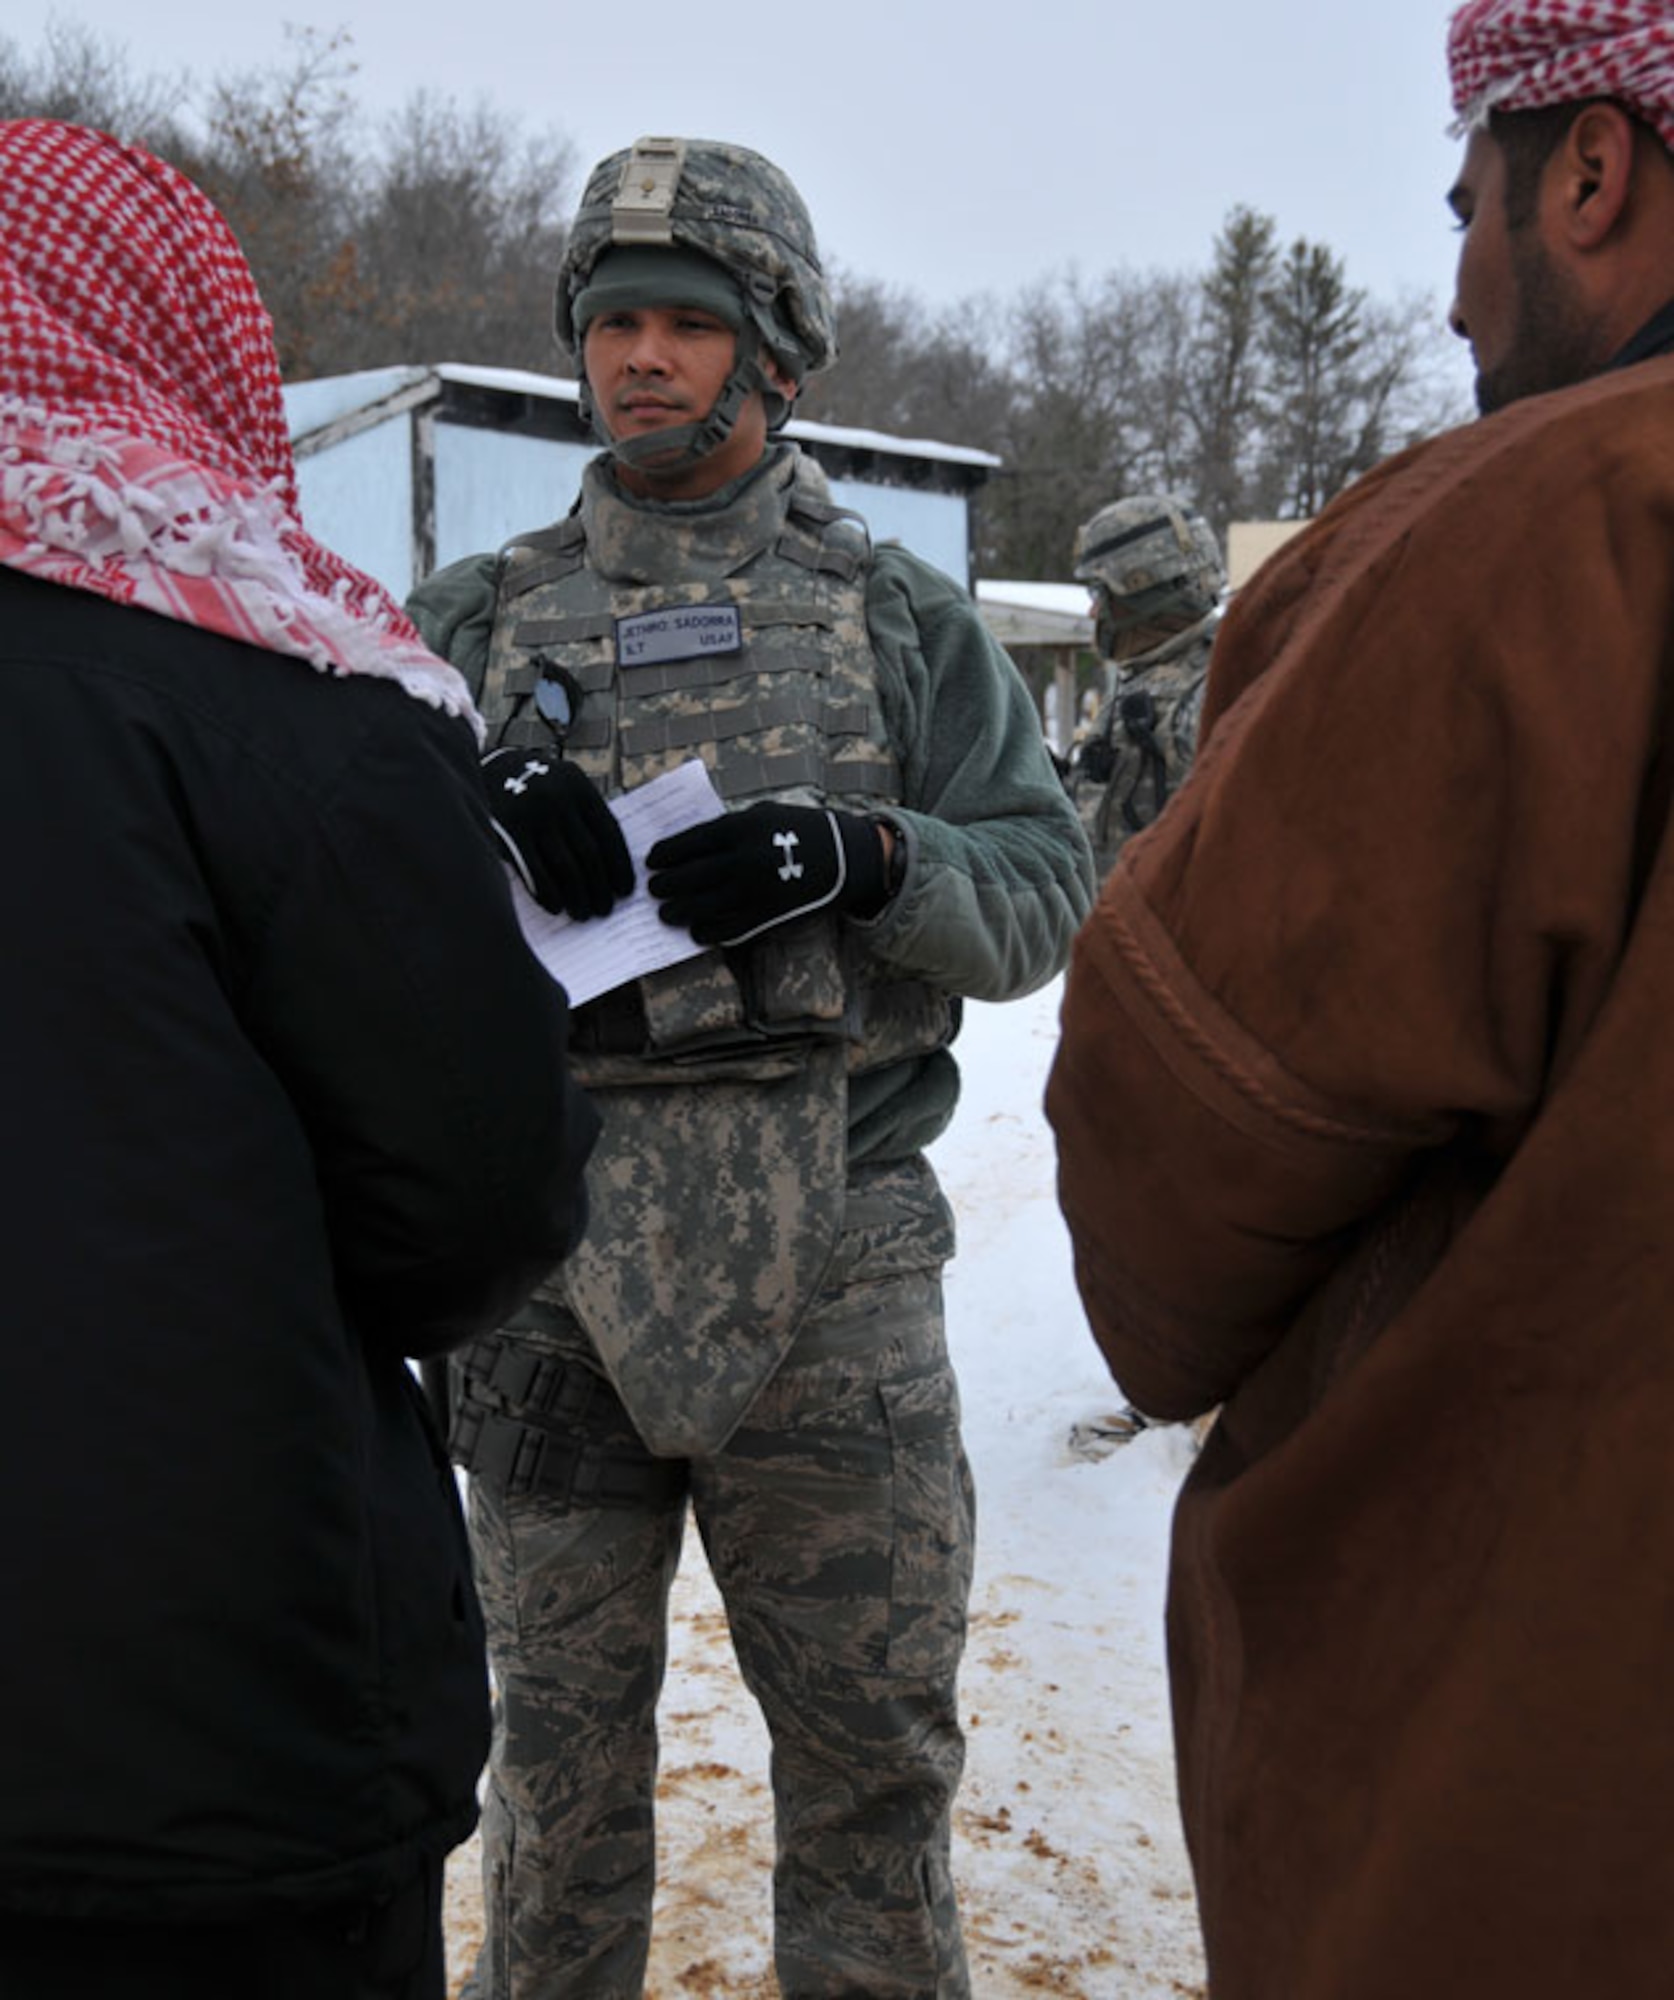 934th Civil Engineers train at Fort McCoy Wis. for their deployment to Southwest Asia in late February. (Air Force Photo/Staff Sgt. Kim Hickey)